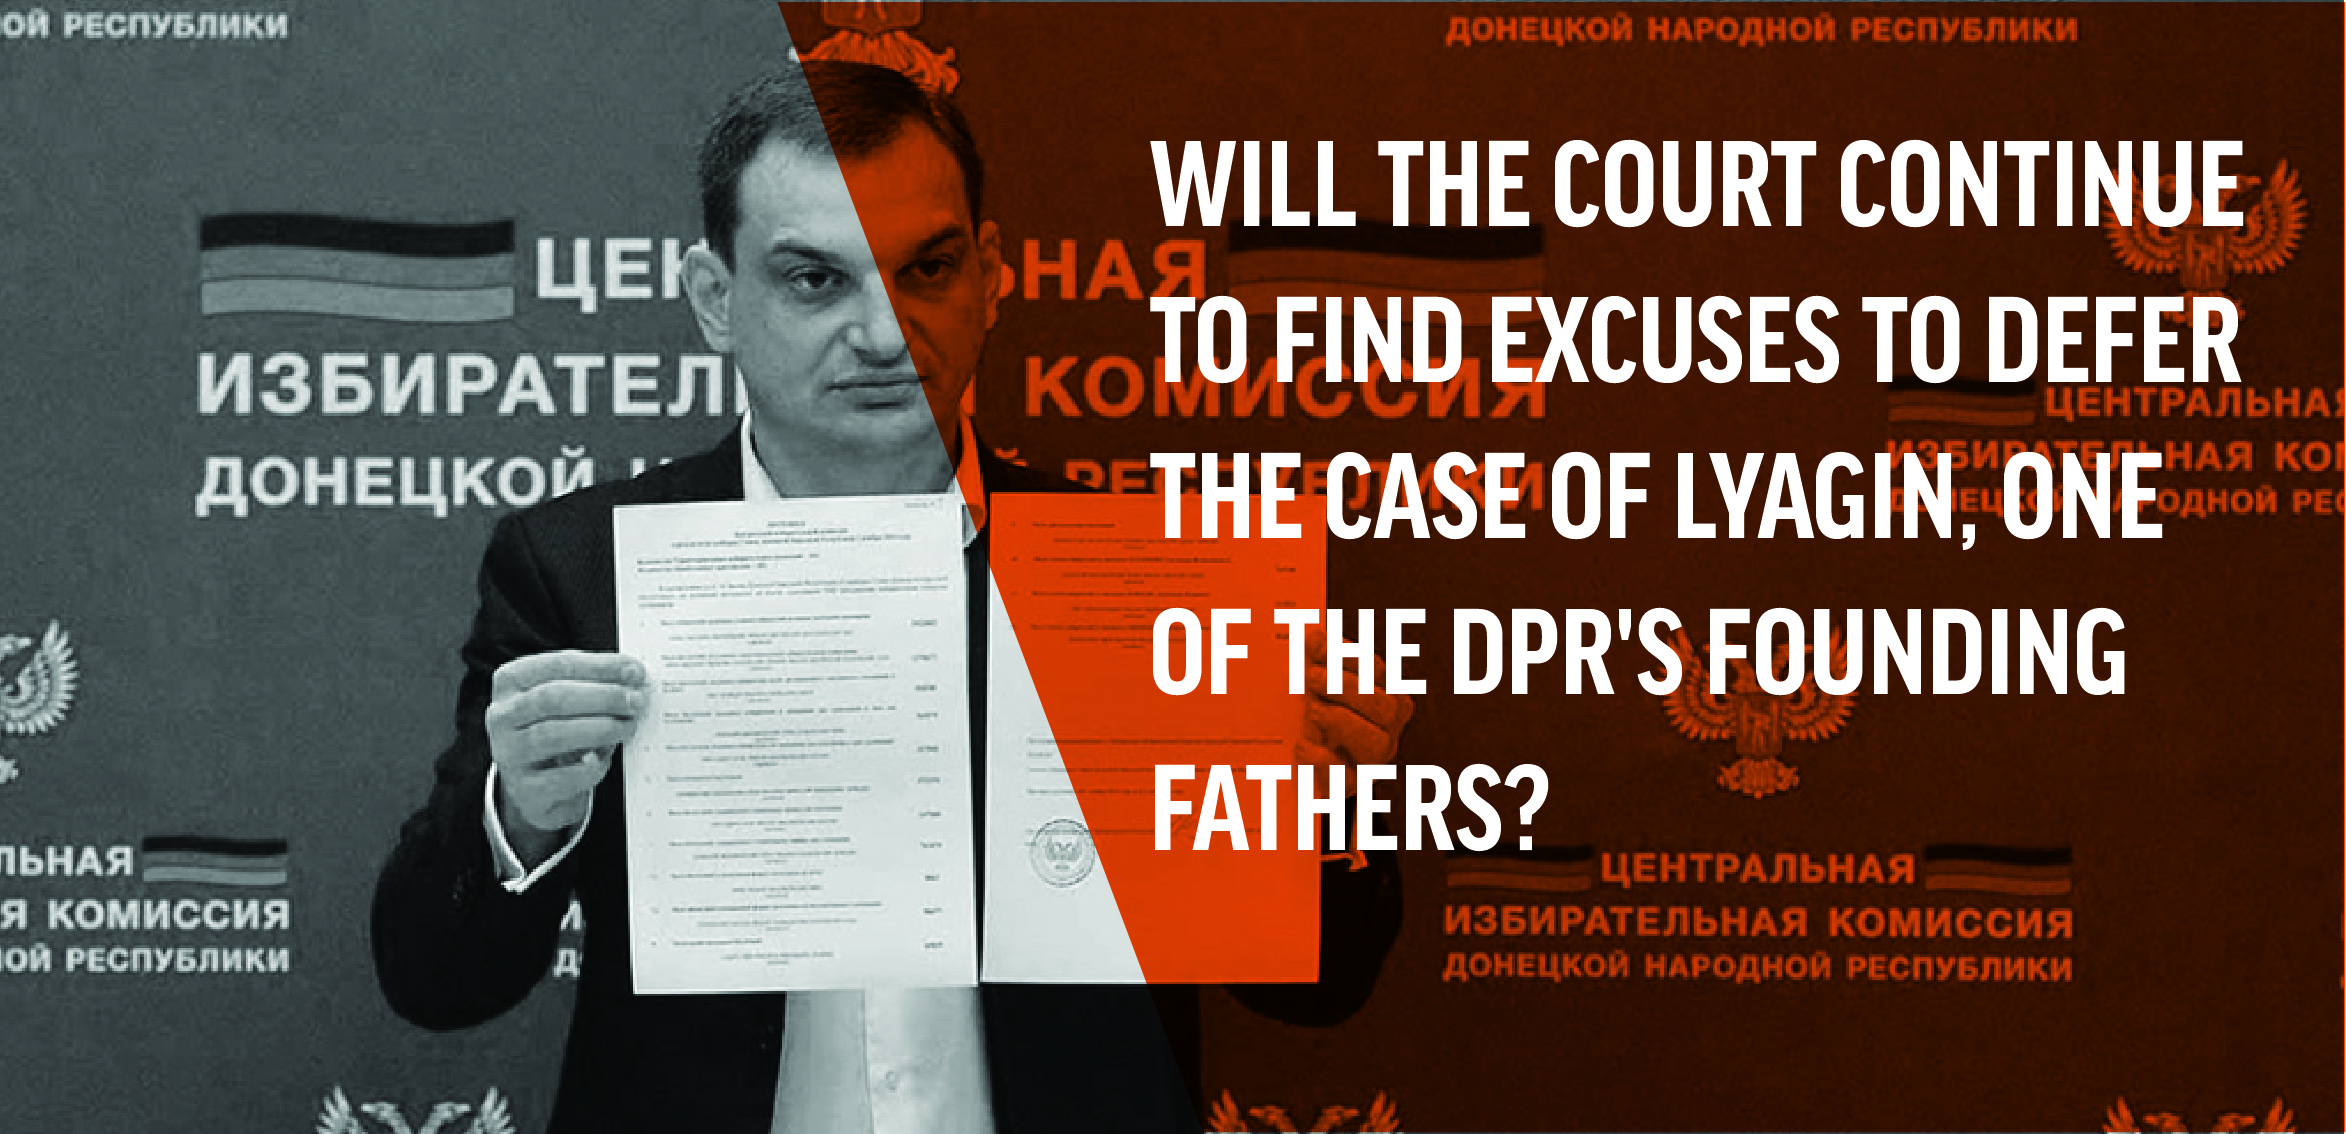 Will the court continue to find excuses to defer the case of Lyagin, one of the DPR's founding fathers?